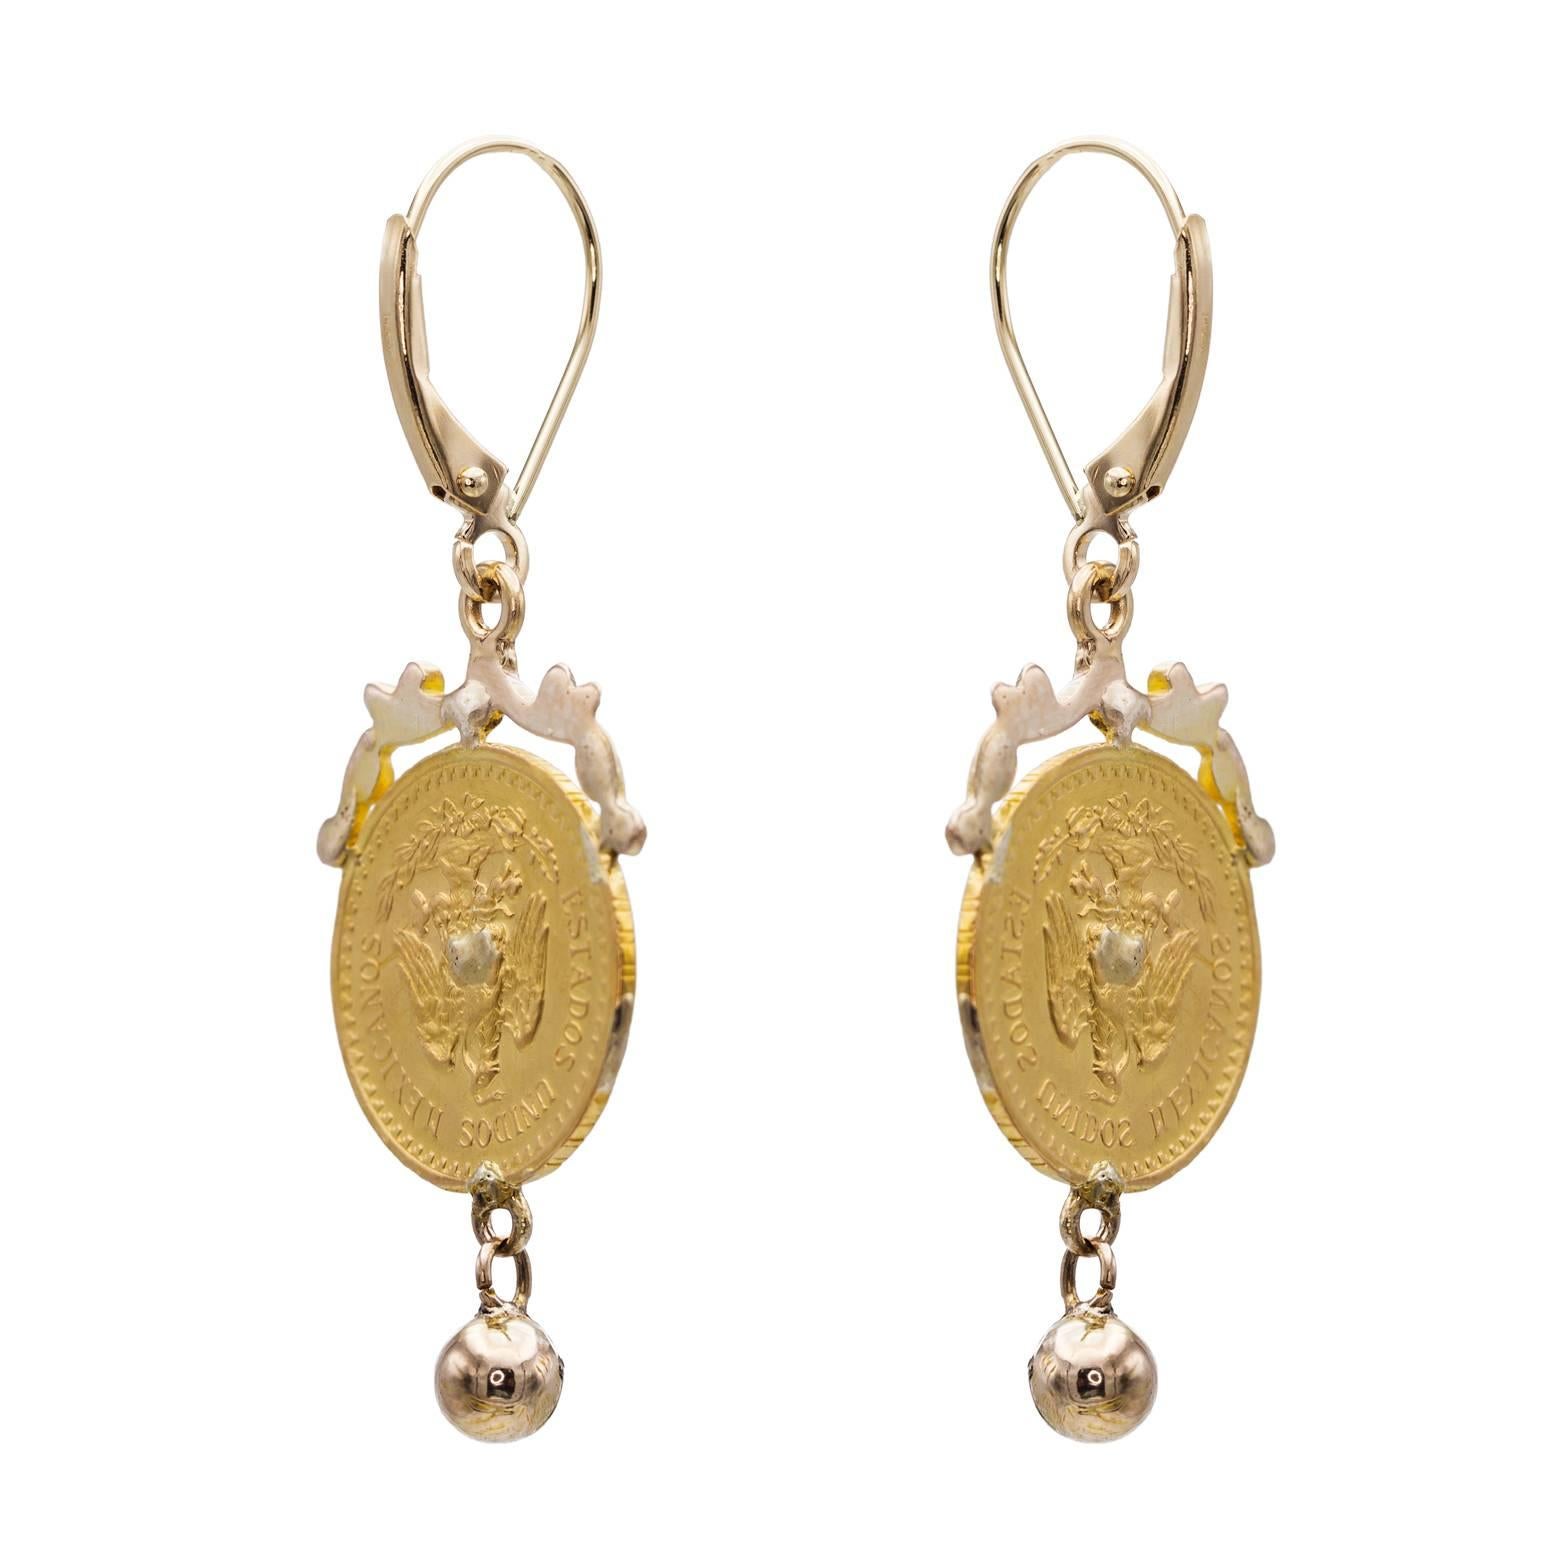 These golden pesos are made of 22K yellow gold and adorned with intricate 14K yellow gold embellishment- a gorgeous design! These coins are circa 1945 and the overall grandeur of these earrings is exquisite. Fun, elegant and remarkable! 